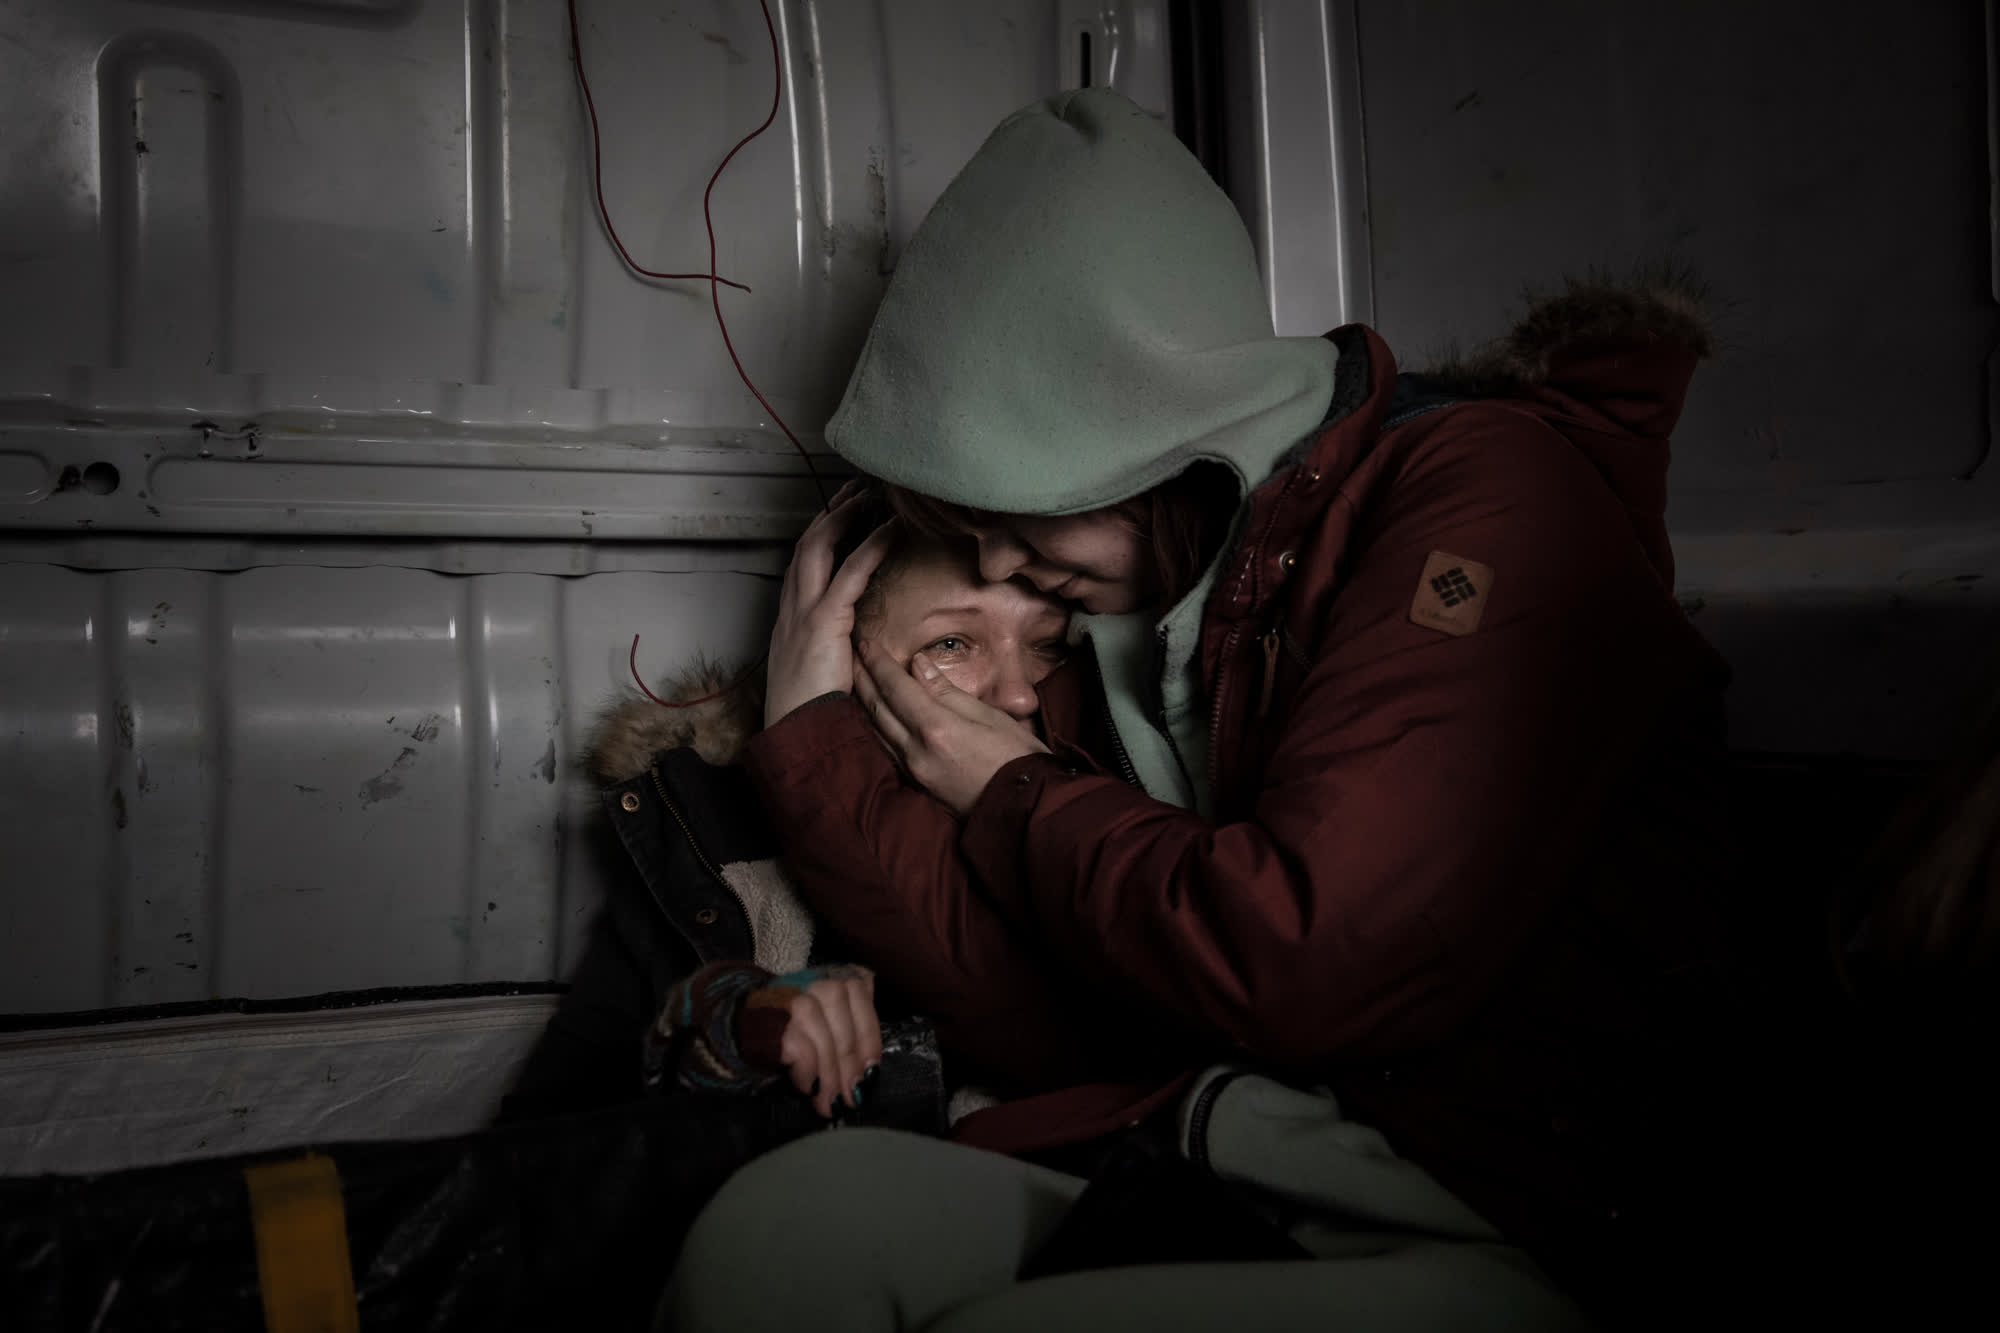 A woman is comforted inside a van during the evacuation of Irpin, Ukraine, in March 2022. Irpin, a suburb of capital city Kyiv, was under attack by Russian artillery. It saw weeks of fighting in the early days of the war.